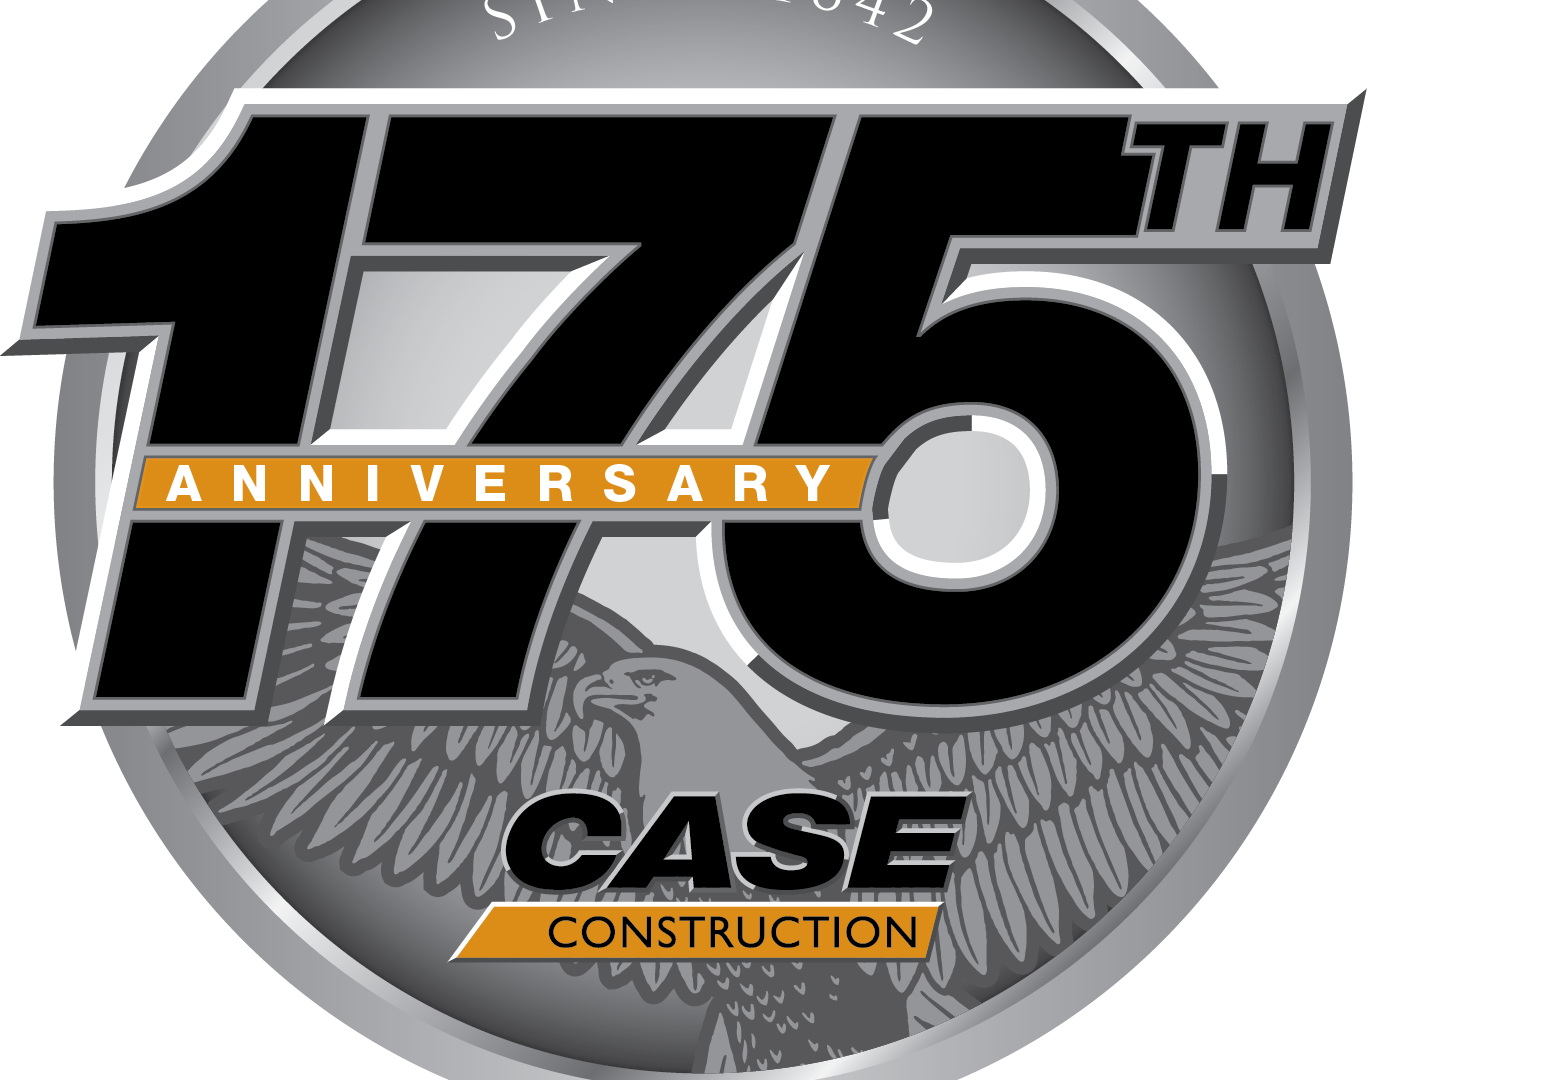 CASE celebrates 175 years of serving construction businesses with effective solutions